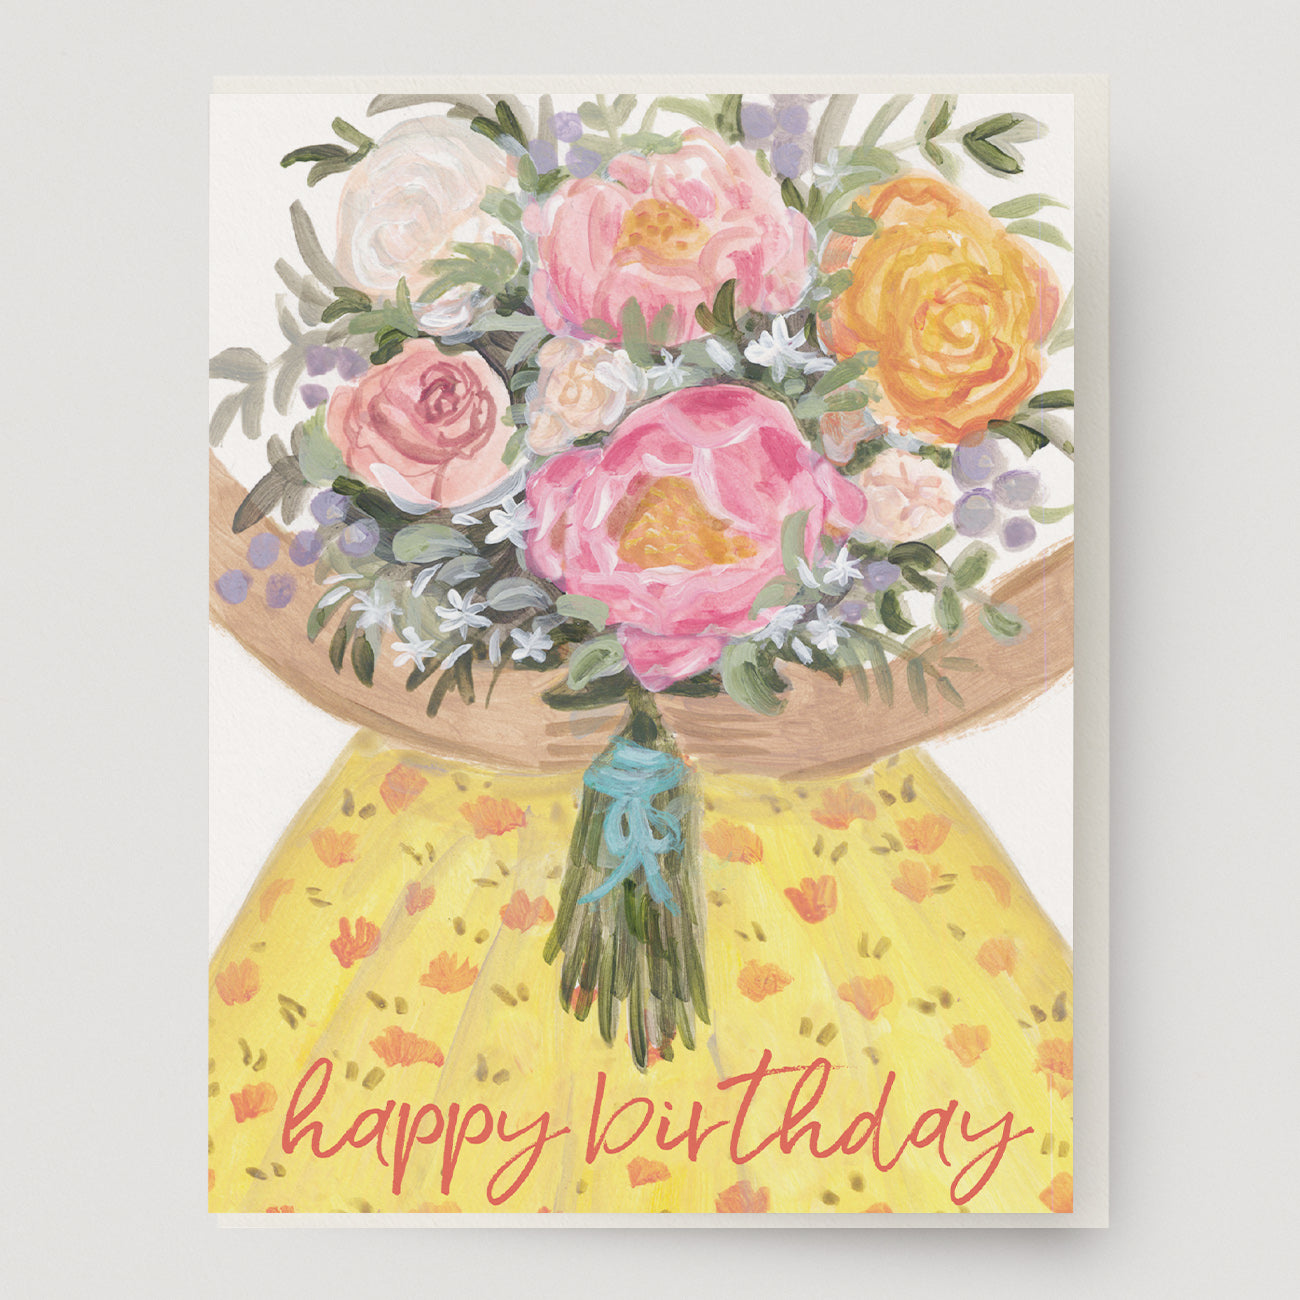 A birthday of hands holding a big bouquet of flowers and a patterned yellow dress with the words, "happy birthday" at the bottom. Hand illustrated by Mendocino Coast artist Katherine Lewis. Made by Ingrid Press card and gift company, ethically printed in the USA.